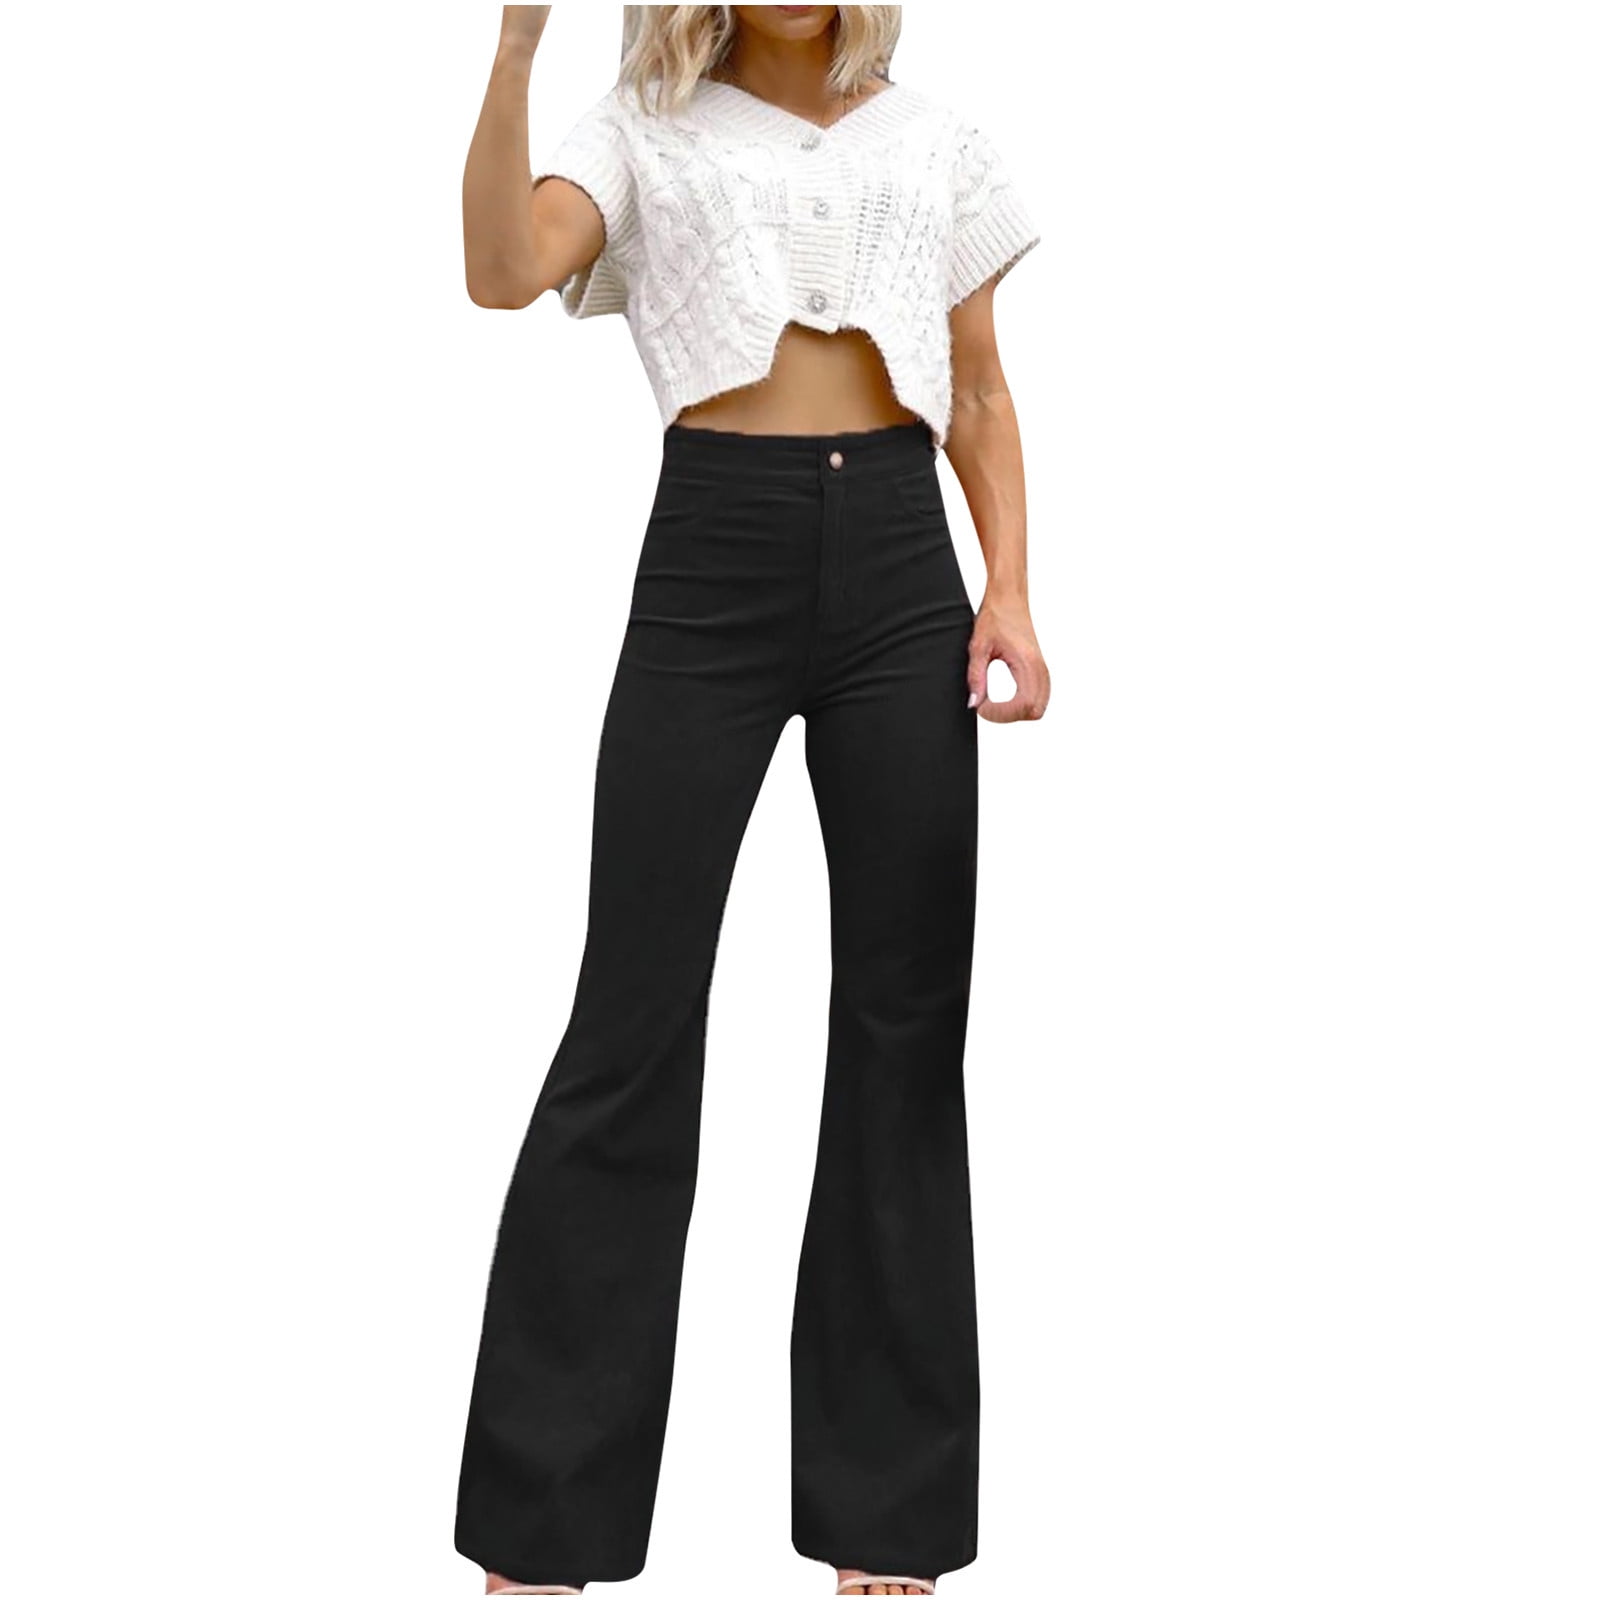 Tarmeek Women's Bell Bottom Jeans Casual Wide Leg High Waisted Button Down  Straight Long Trousers Pants 